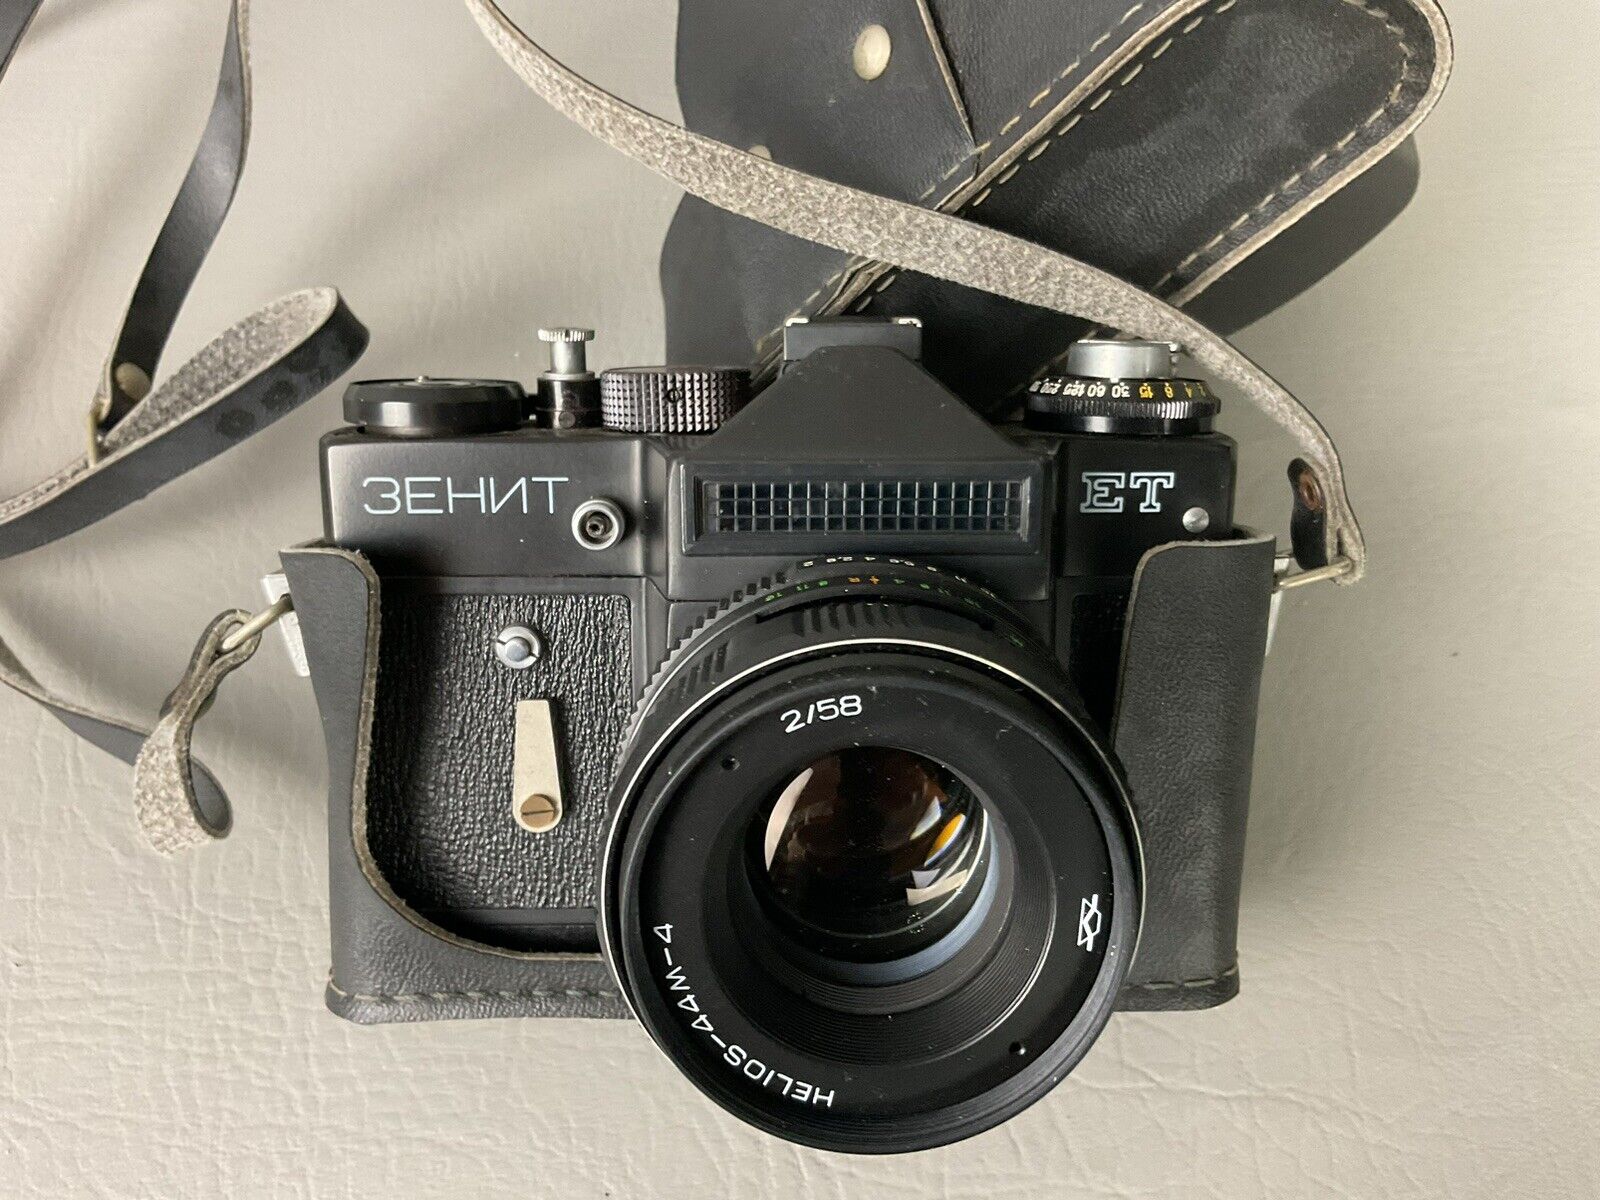 Vintage Camera Zenit 3Ehnt with Helios 58mm 1:2 Lens and original leather cover